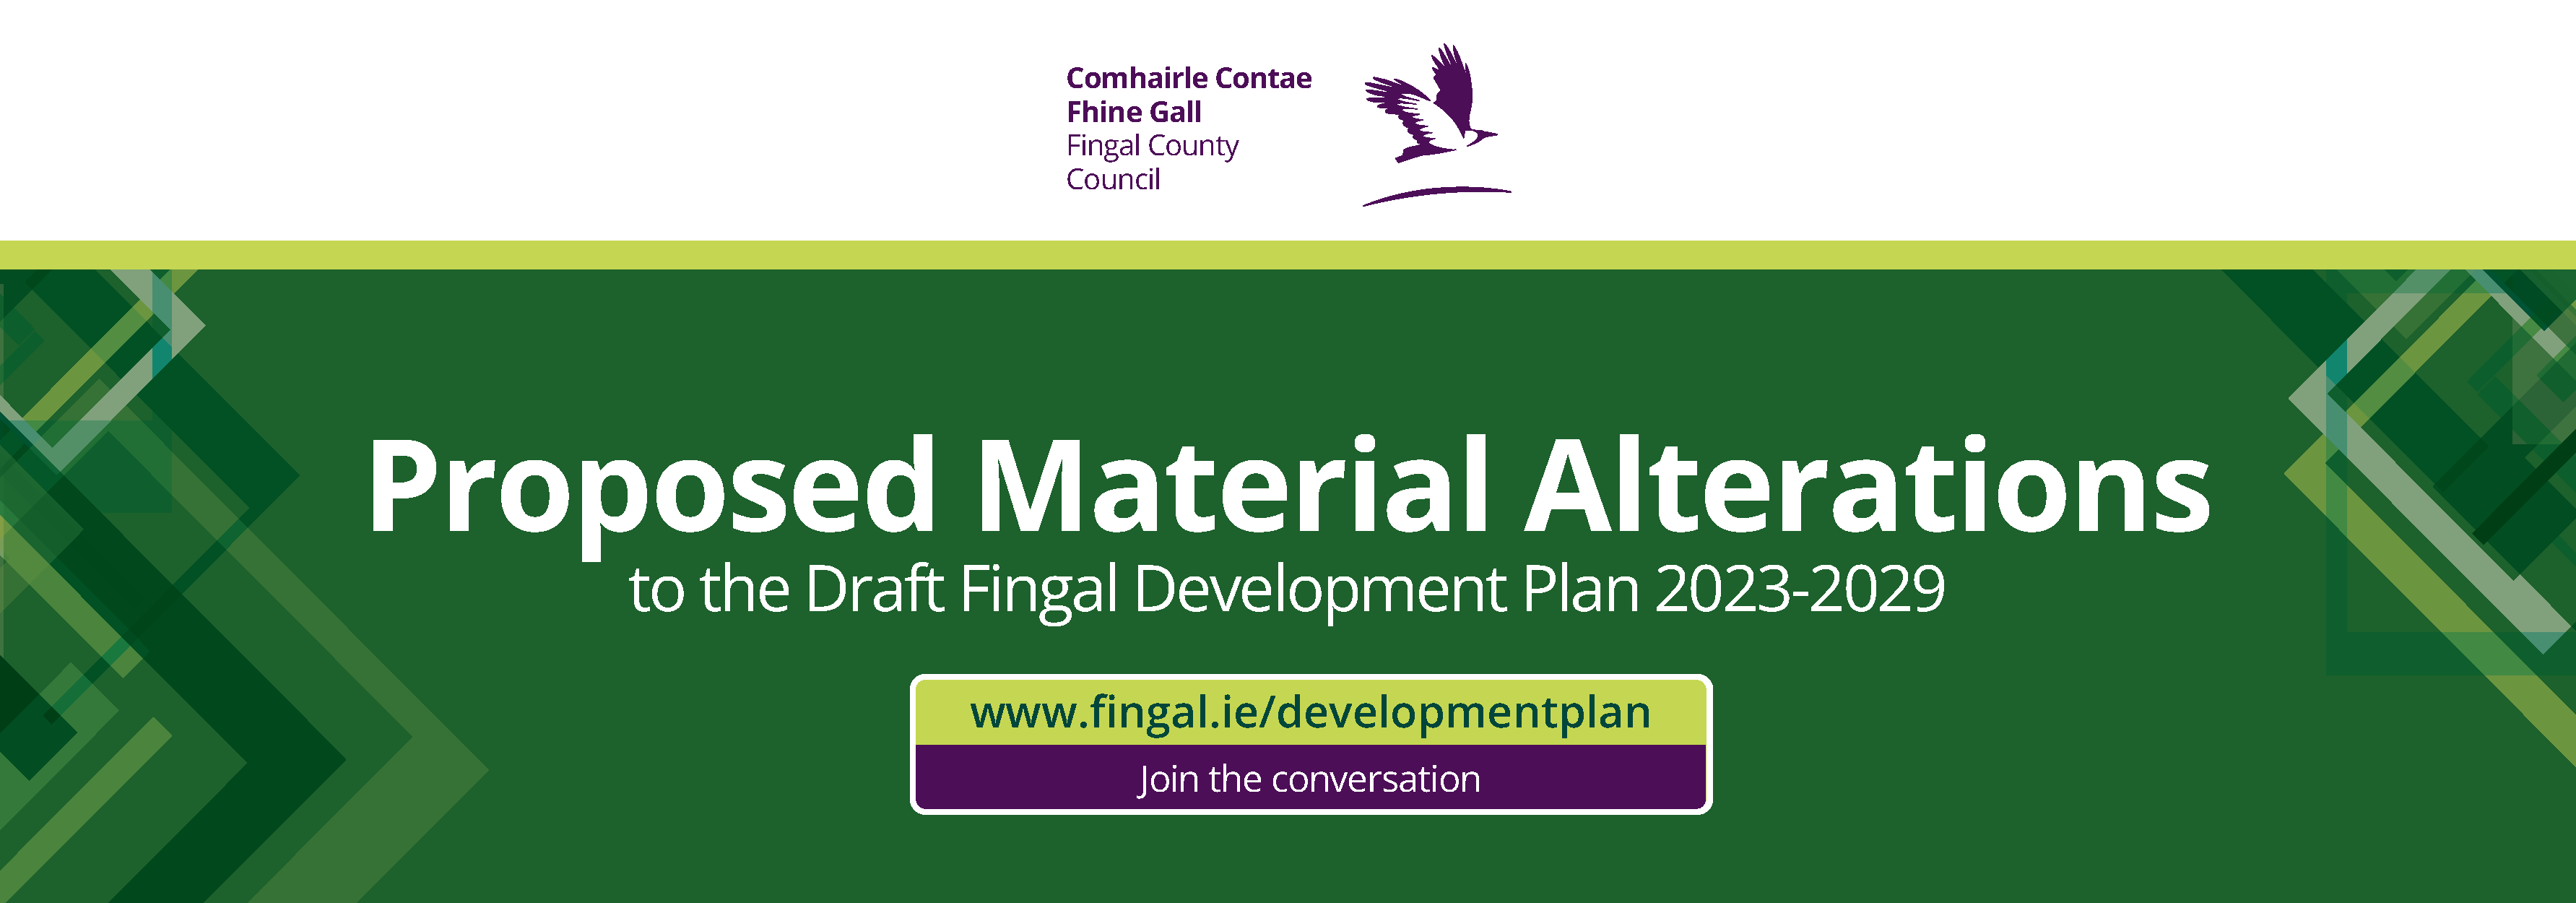 Proposed Material Alternations to the Fingal CDP banner